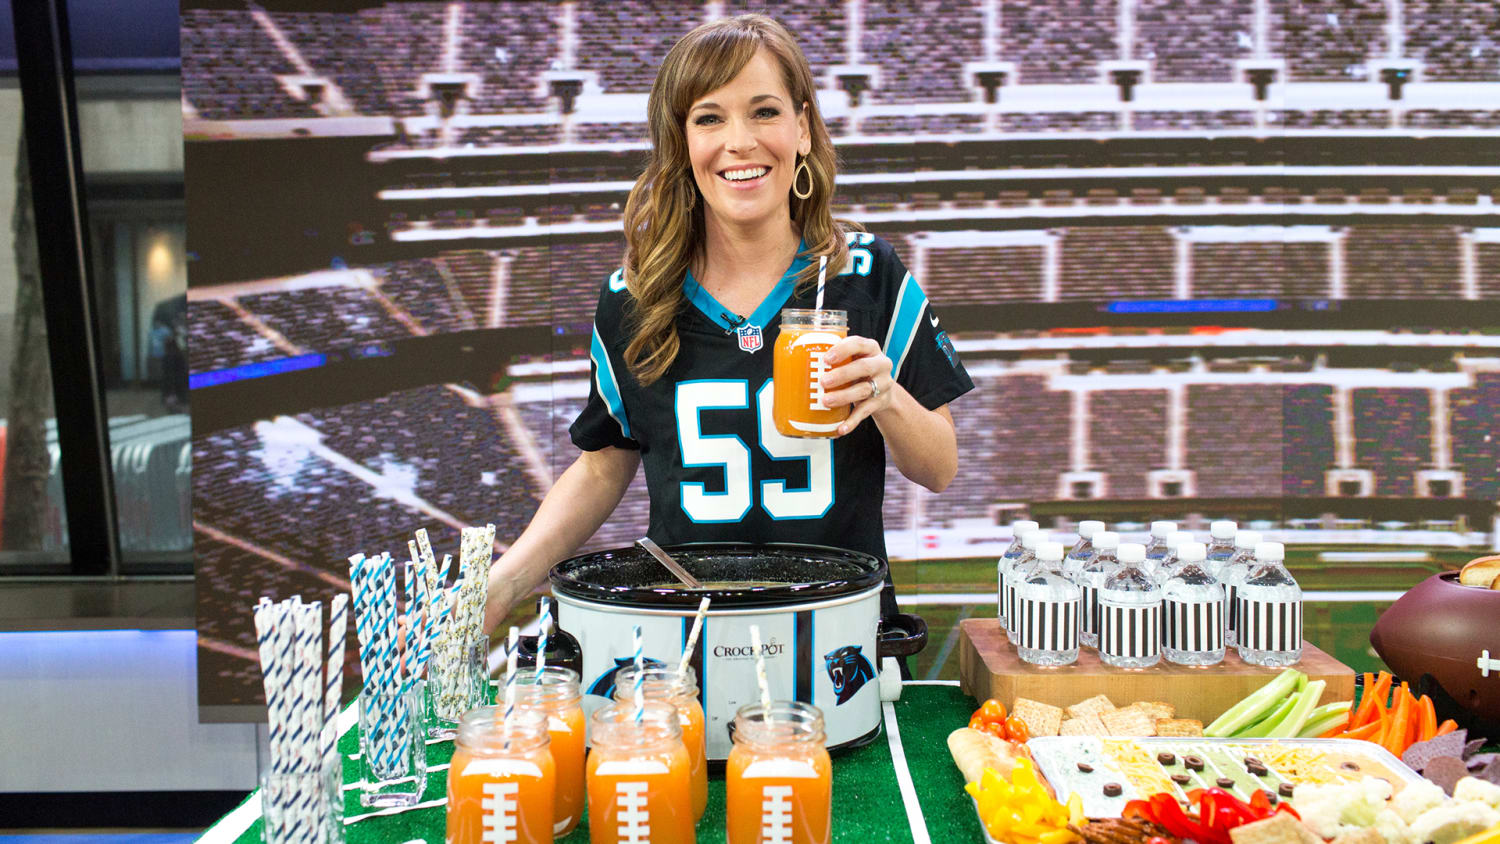 super bowl party ideas: from food to decor, here's how to nail your